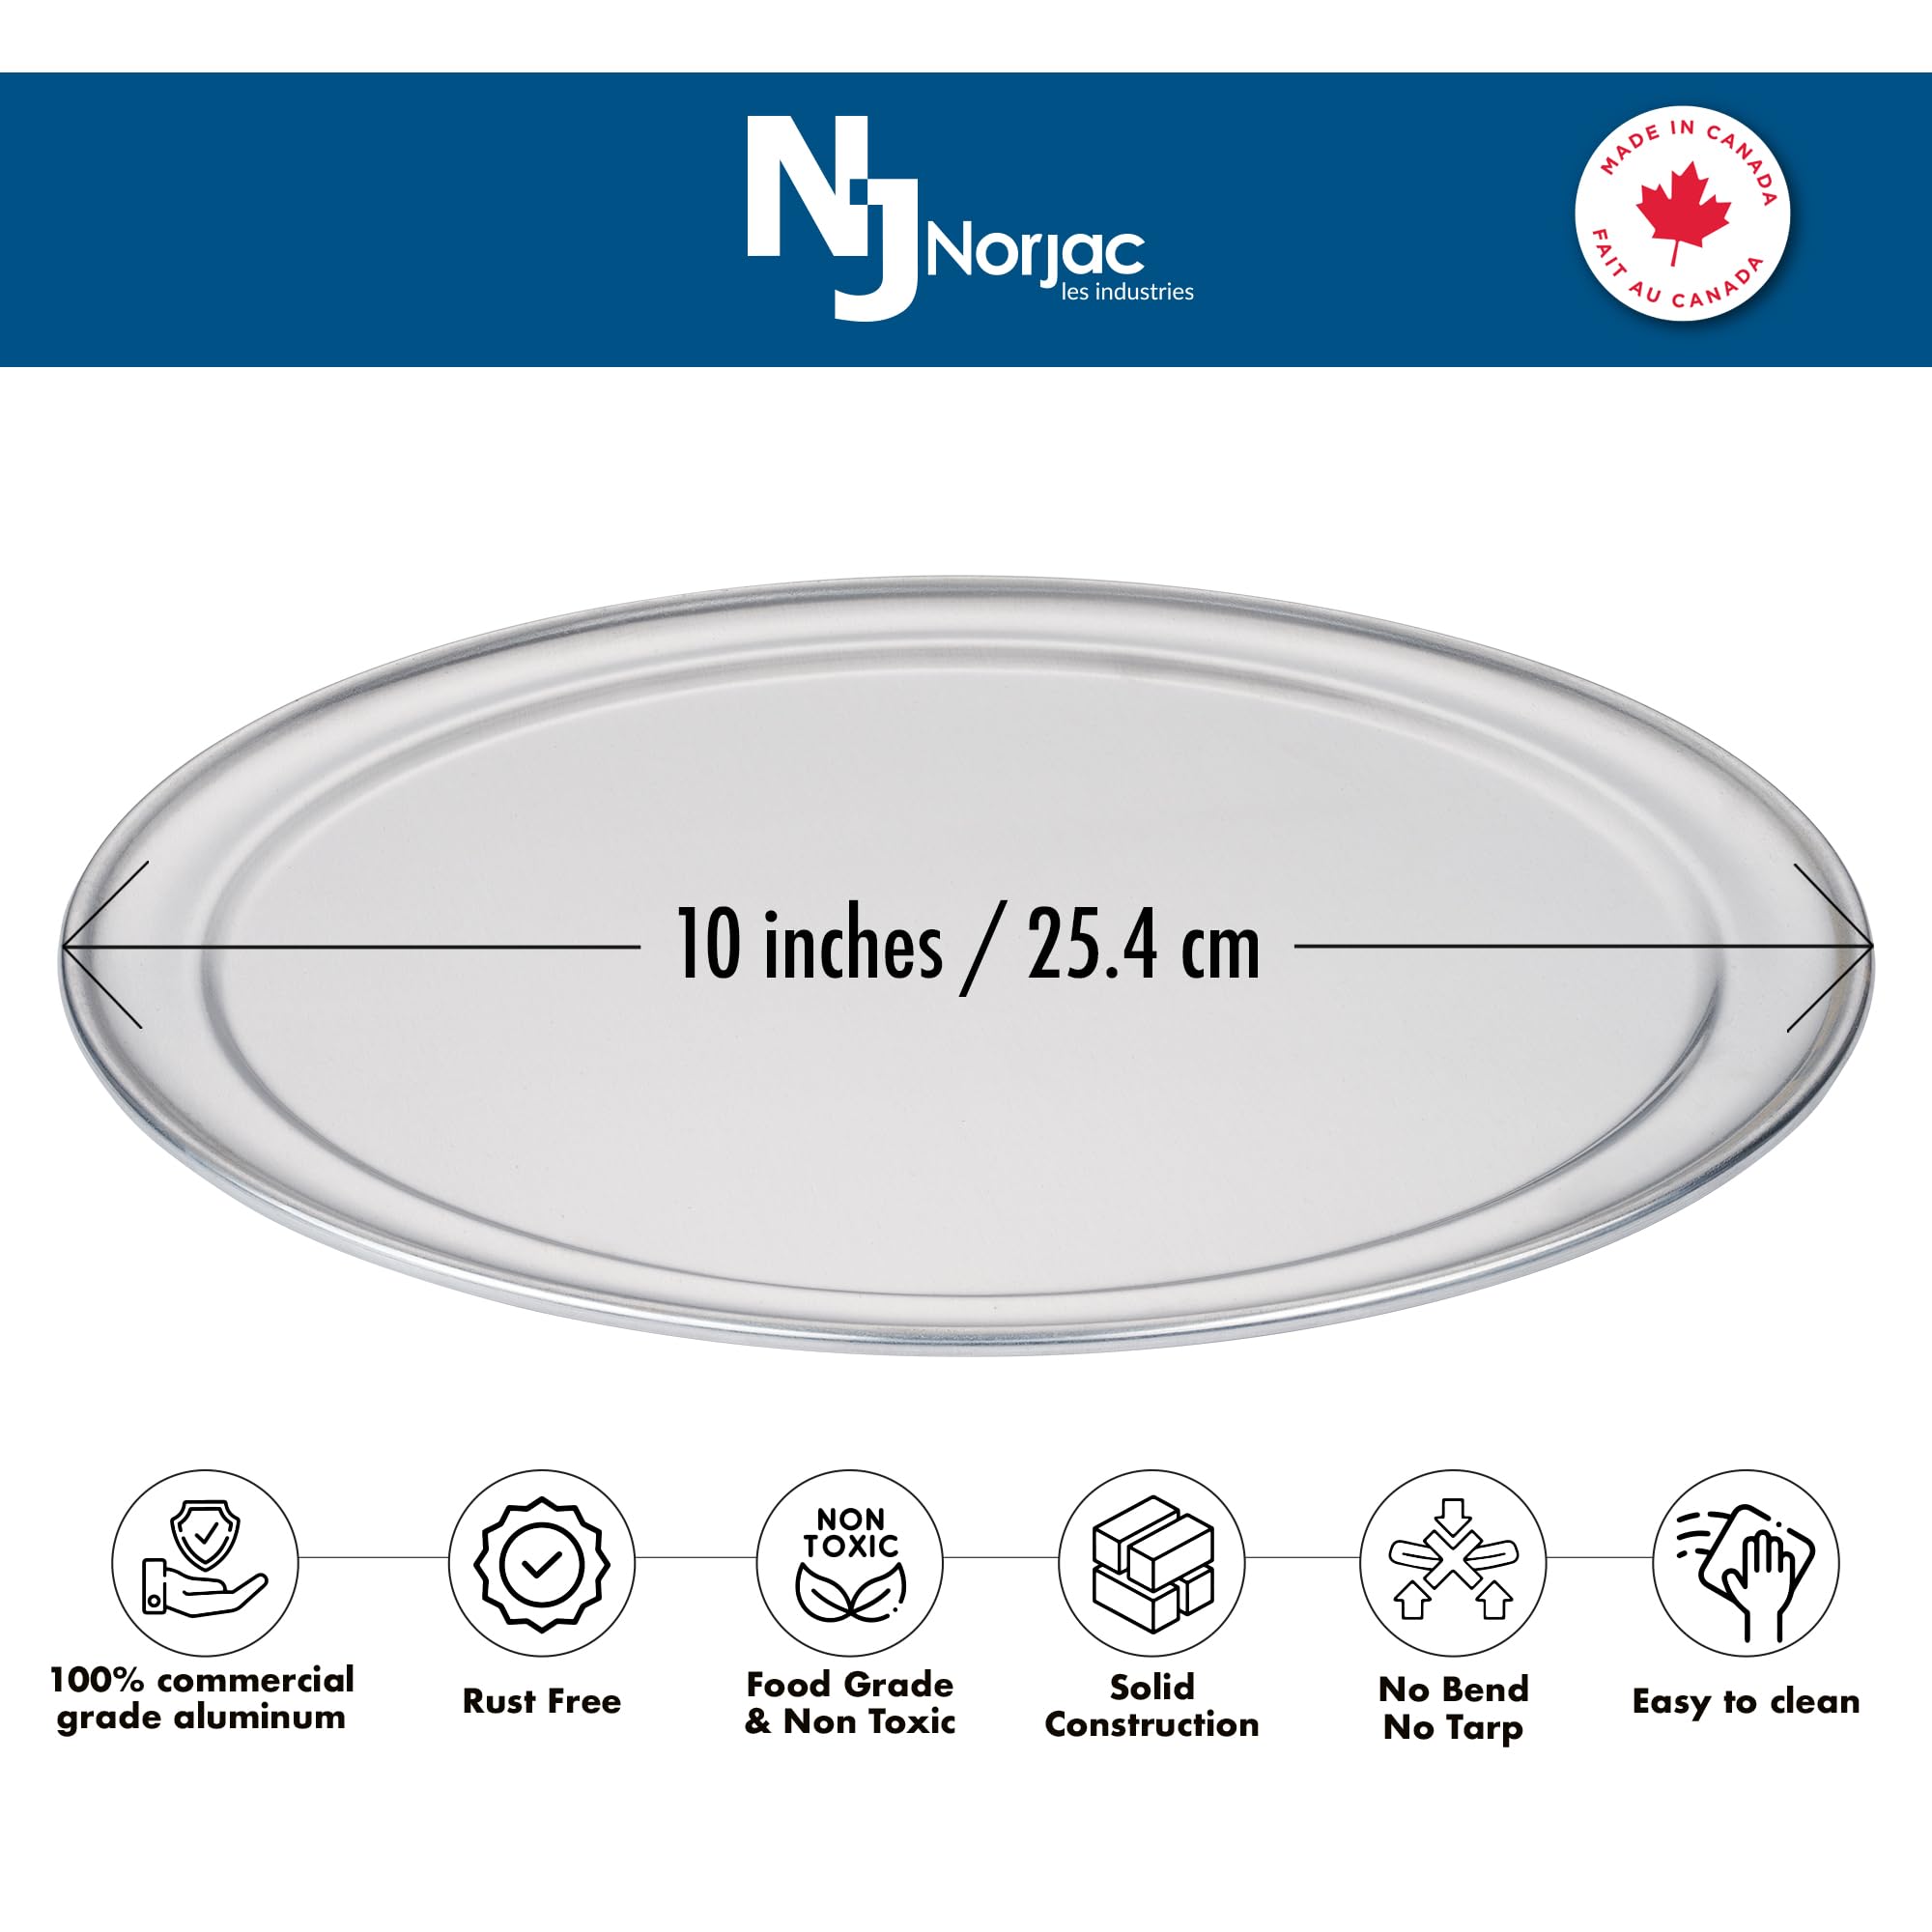 Norjac Wide-Rim Pizza Pan, 10 Inch, 6 Pack, Restaurant-Grade, 100% Solid Aluminum, Baking Pan, Oven-Safe, Rust-Free.